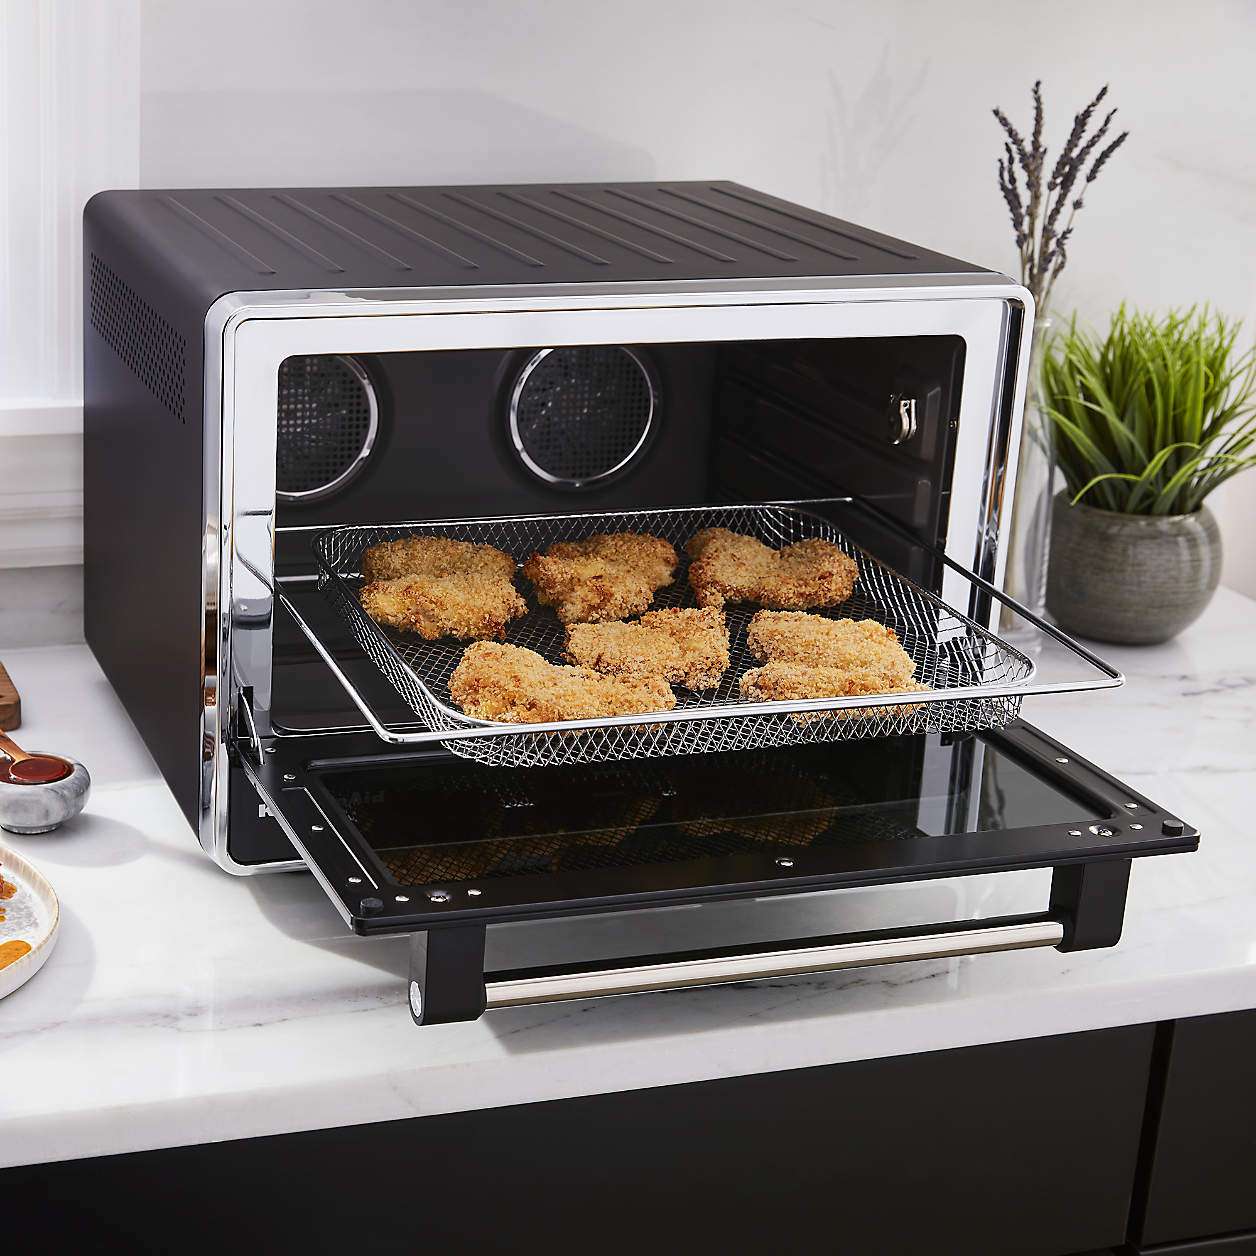 A KitchenAid convection oven and air fryer on a kitchen counter